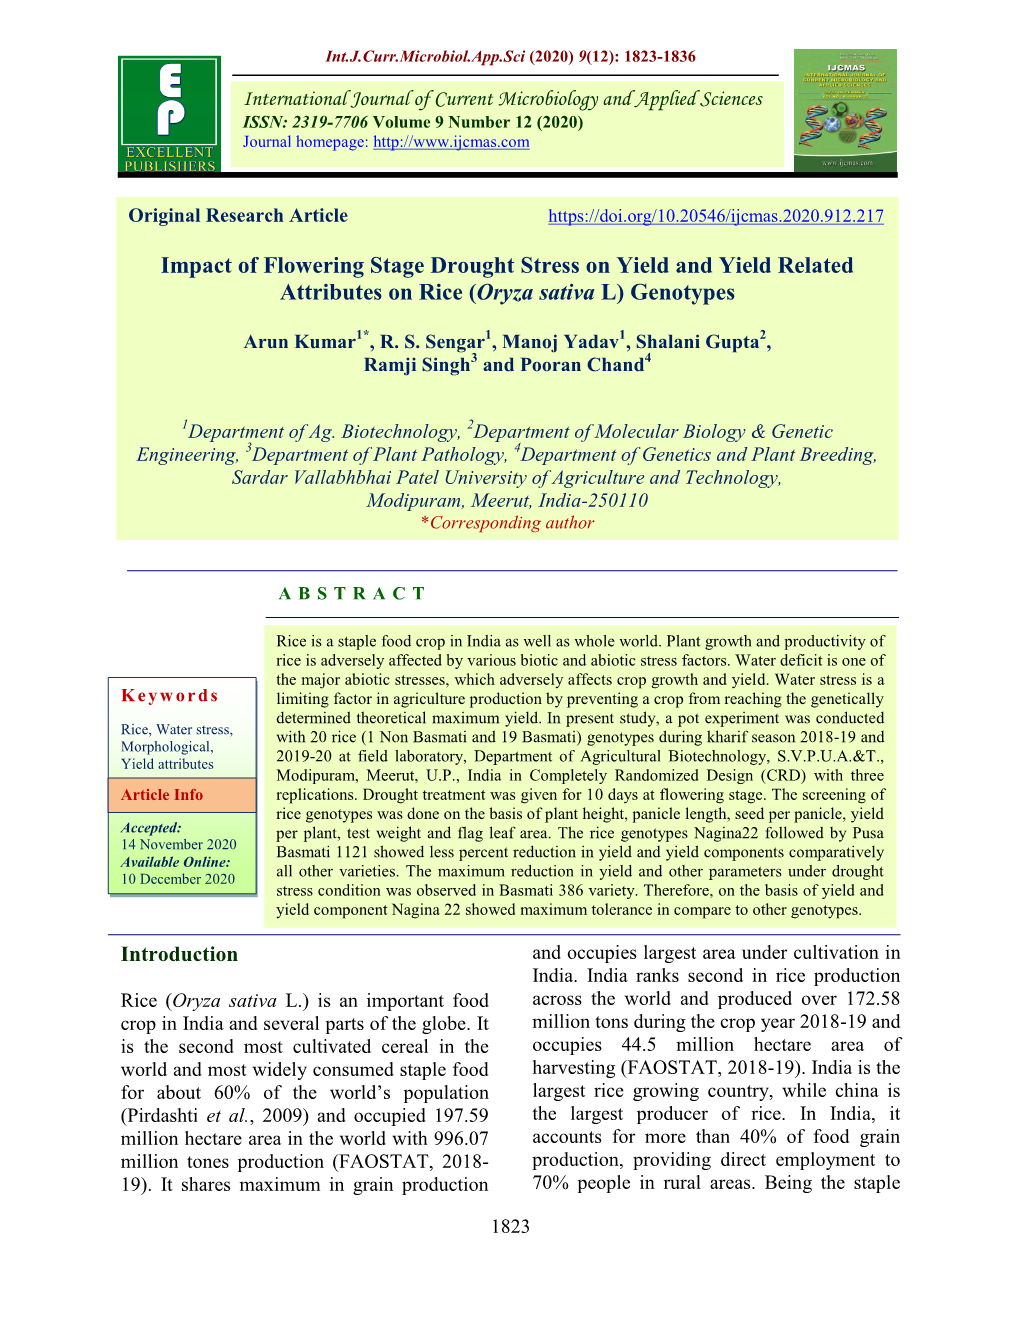 Impact of Flowering Stage Drought Stress on Yield and Yield Related Attributes on Rice (Oryza Sativa L) Genotypes